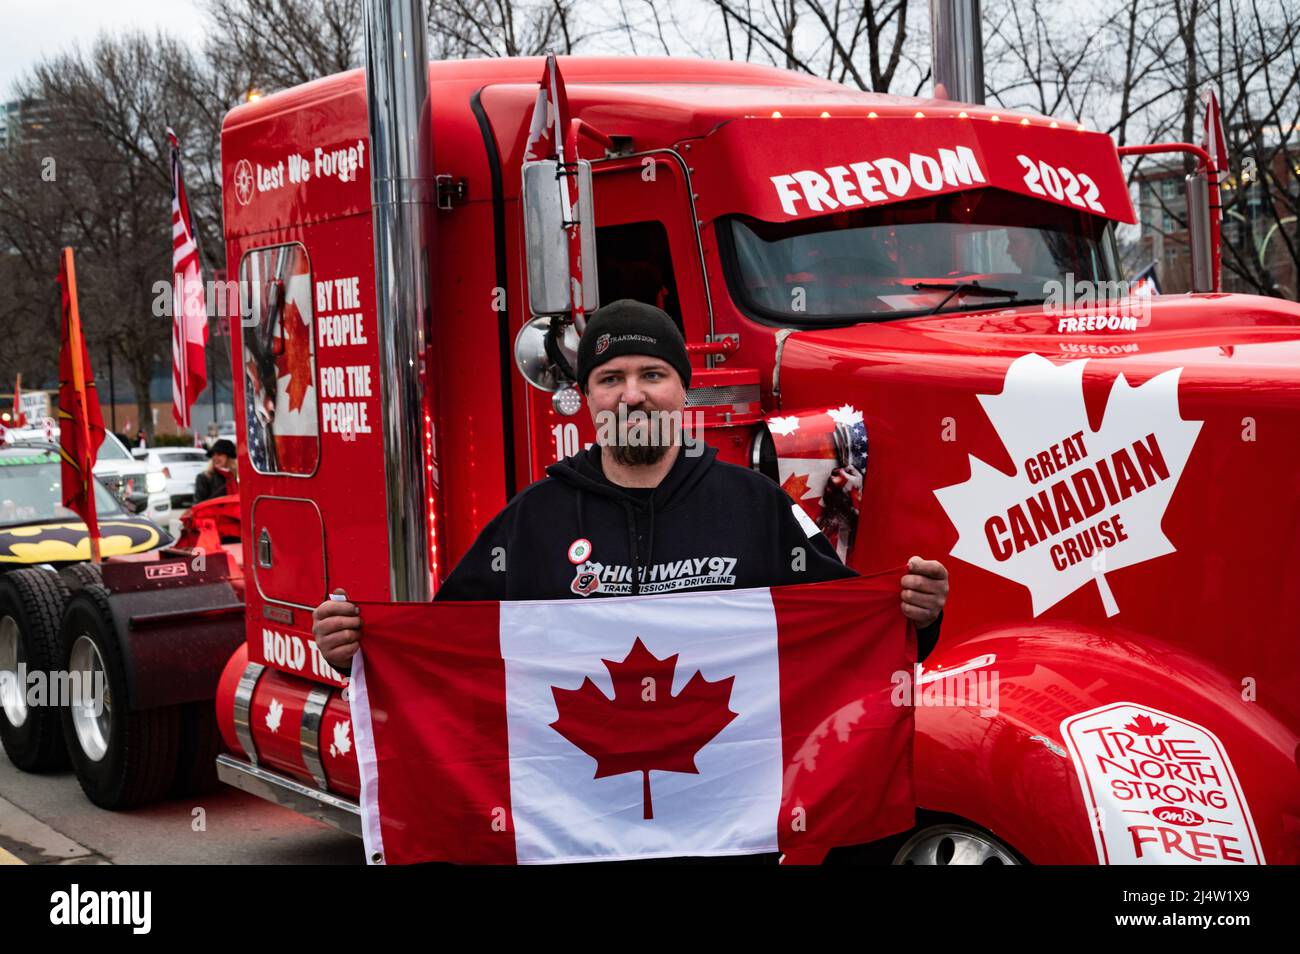 A truck driver part of the Great Canadian Cruise holds a flag at an event to protest the country's vaccine mandates and other COVID restrictions. Stock Photo